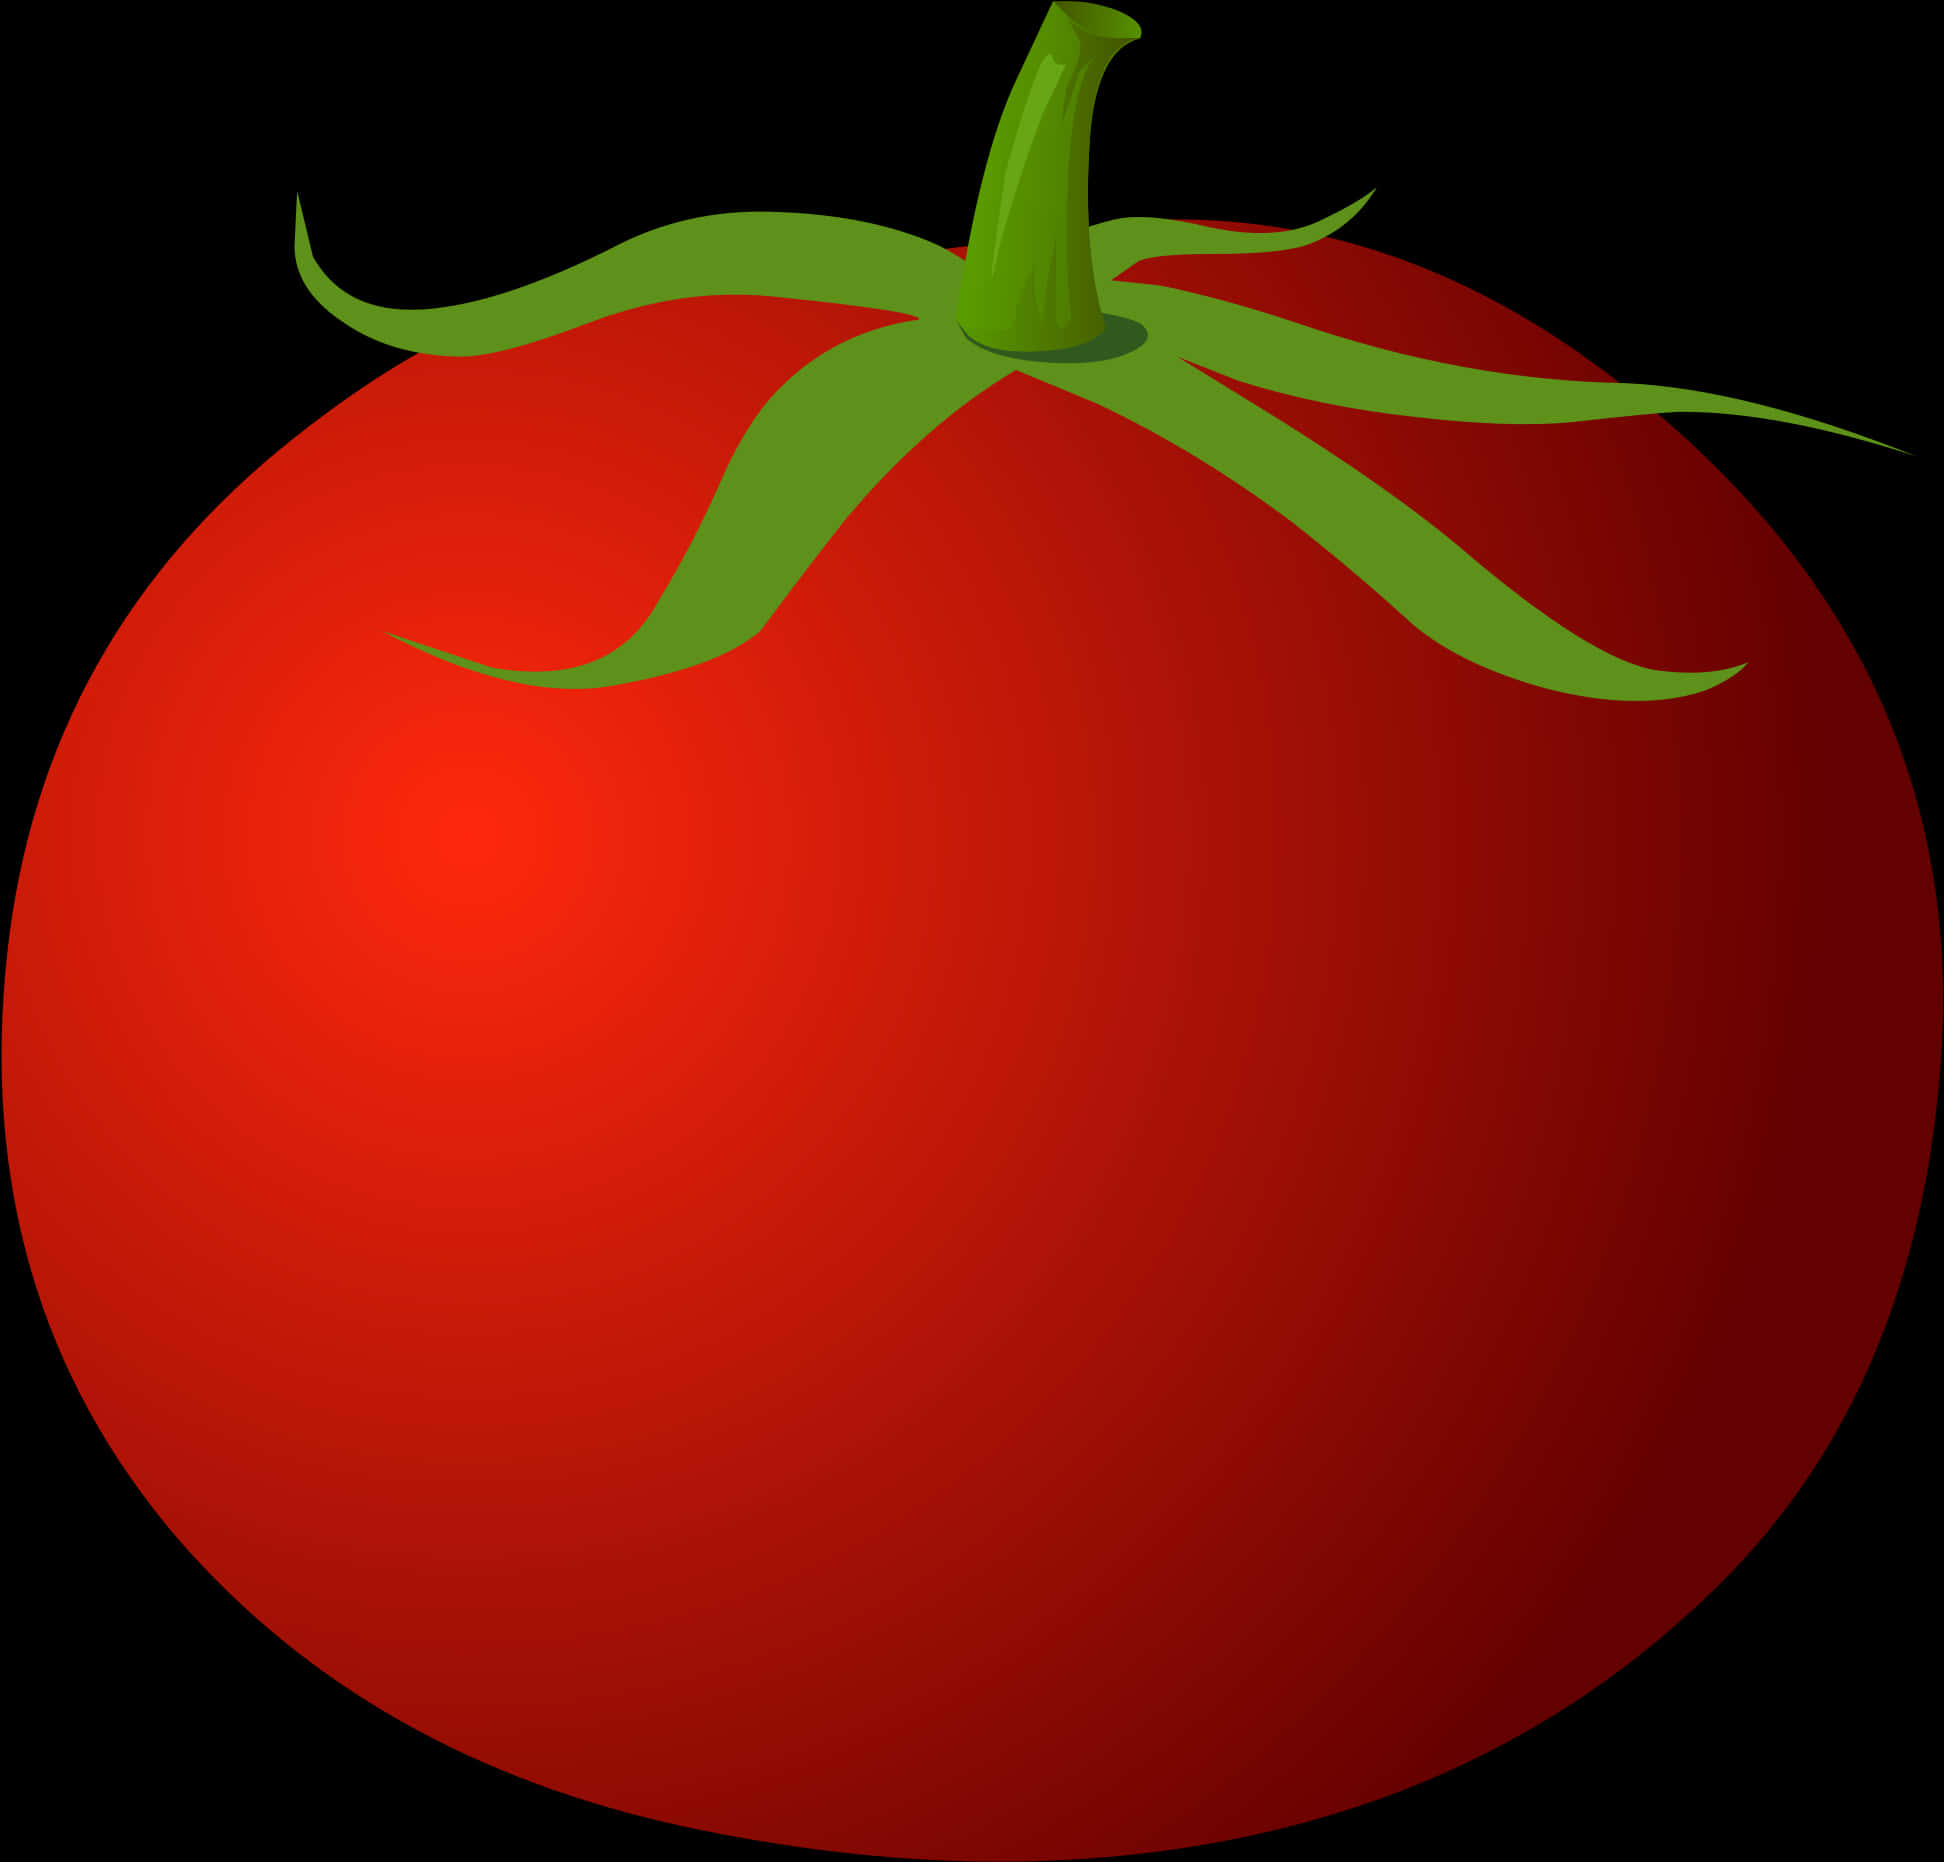 Red Tomato Illustration PNG image